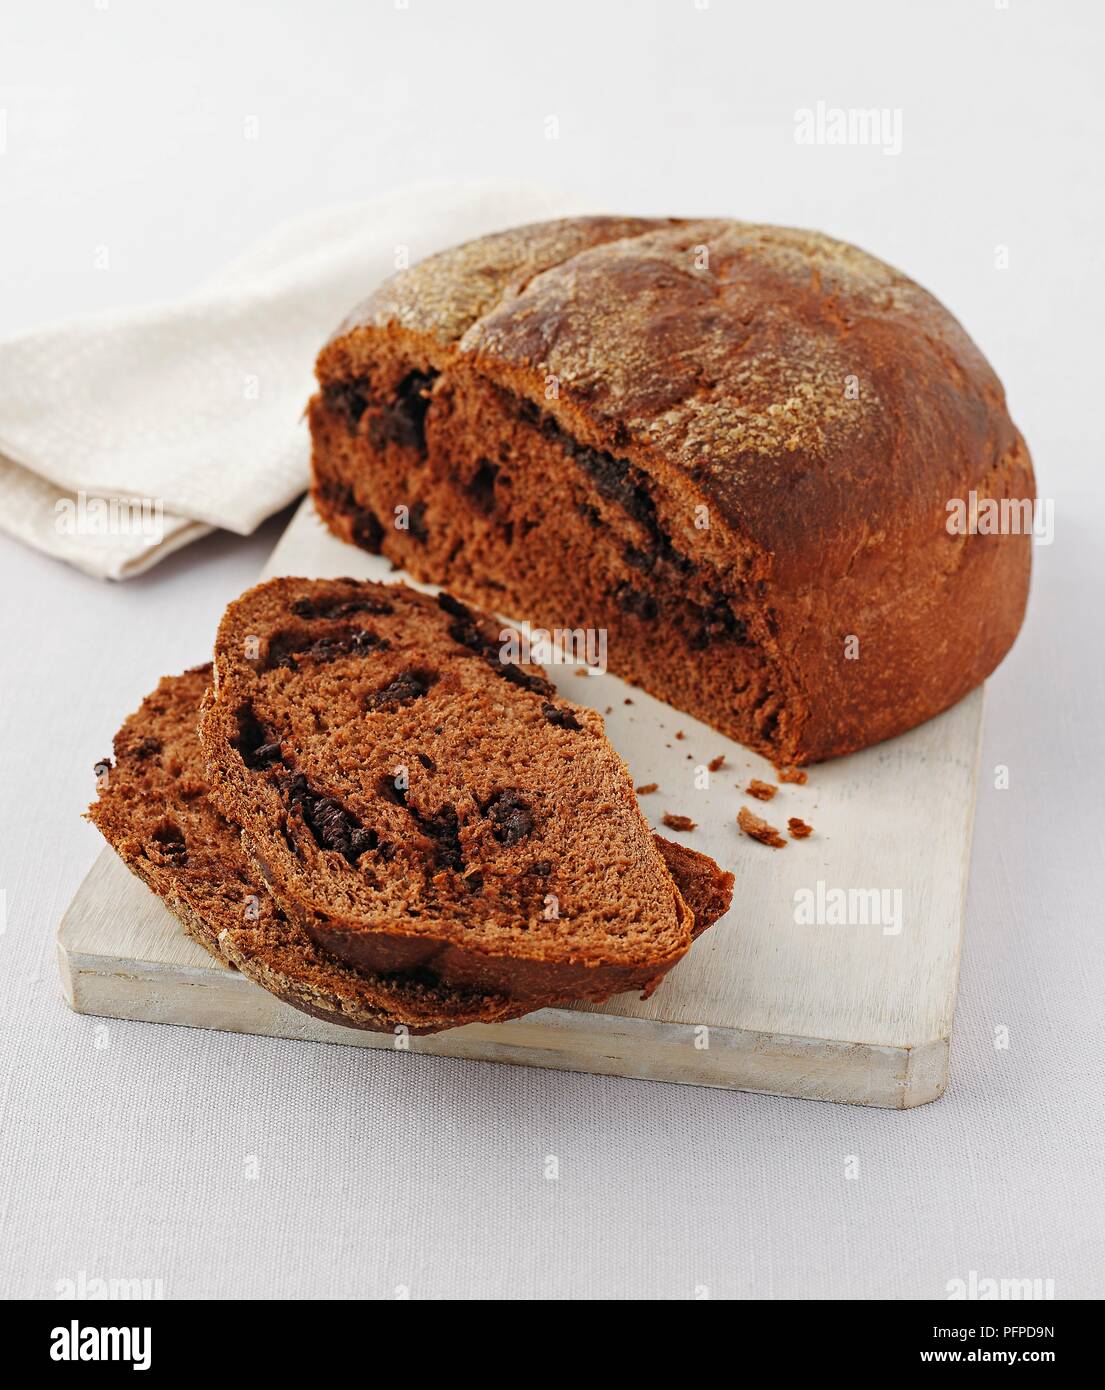 Chocolate bread with a couple of slices cut off from the loaf Stock Photo